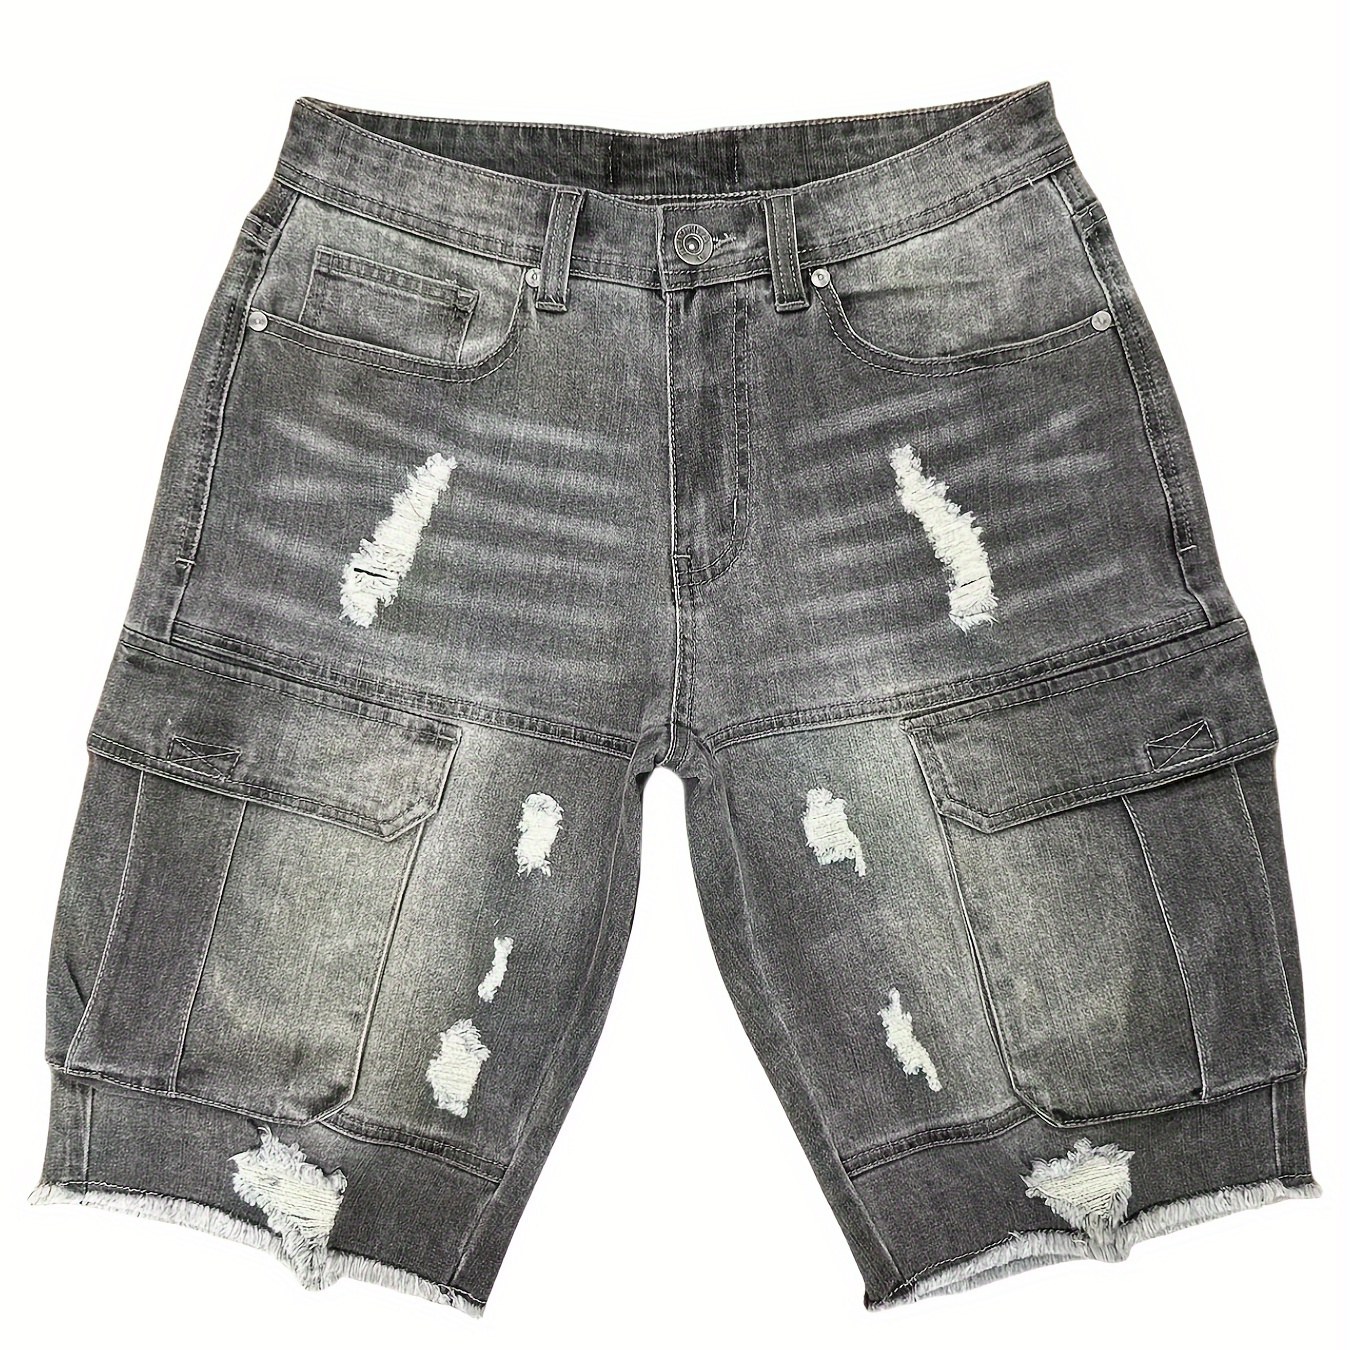 

Men's Casual Distressed Denim Shorts, Knee Length, Frayed Hem, Gray Washed Jeans With Pockets, Style E911820-dg-e5